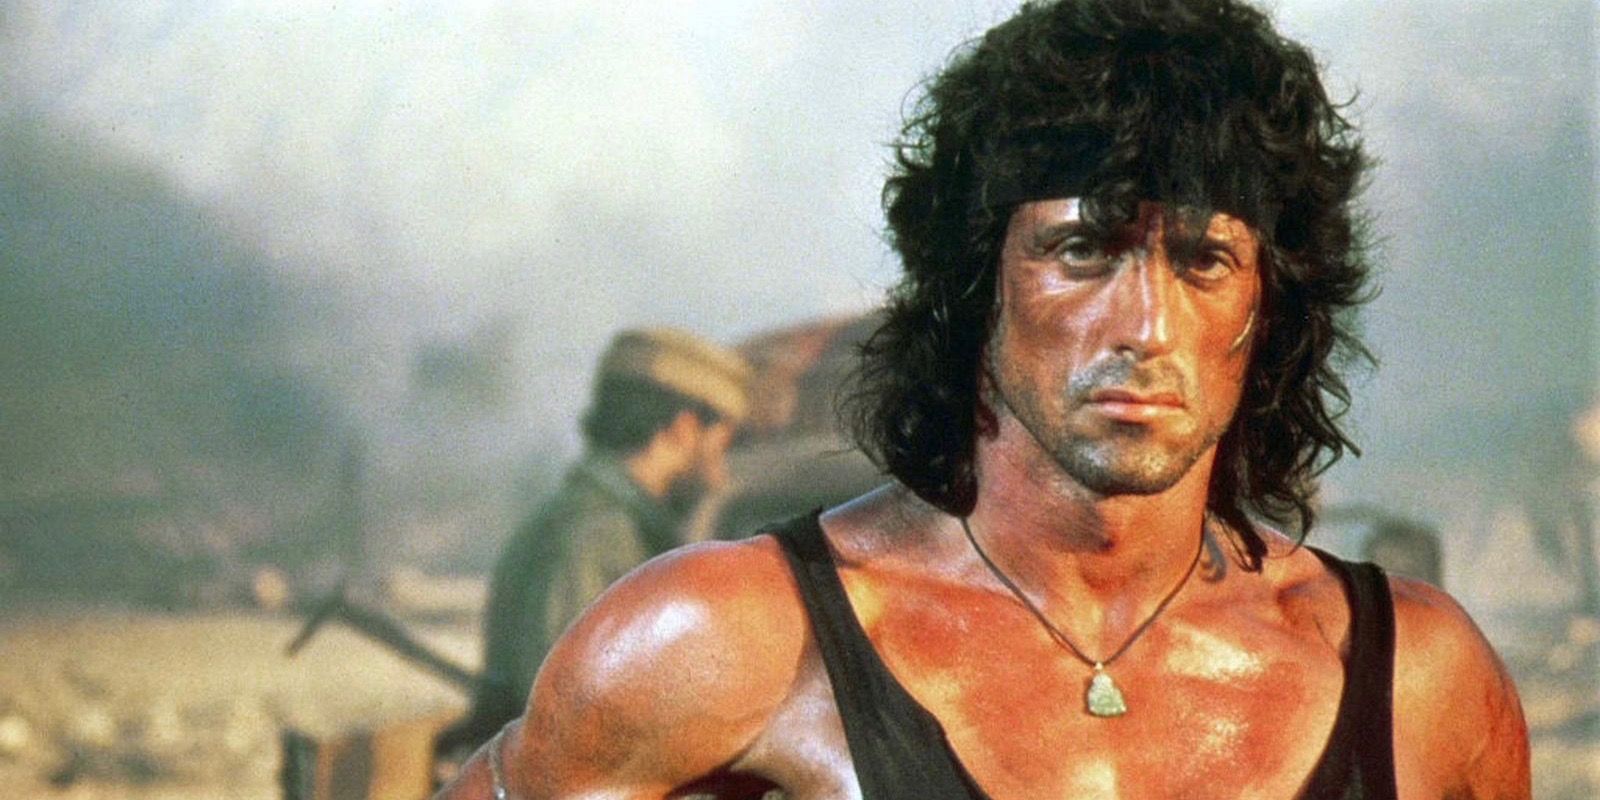 Rambo 5 Sylvester Stallone to Star & Possibly Direct